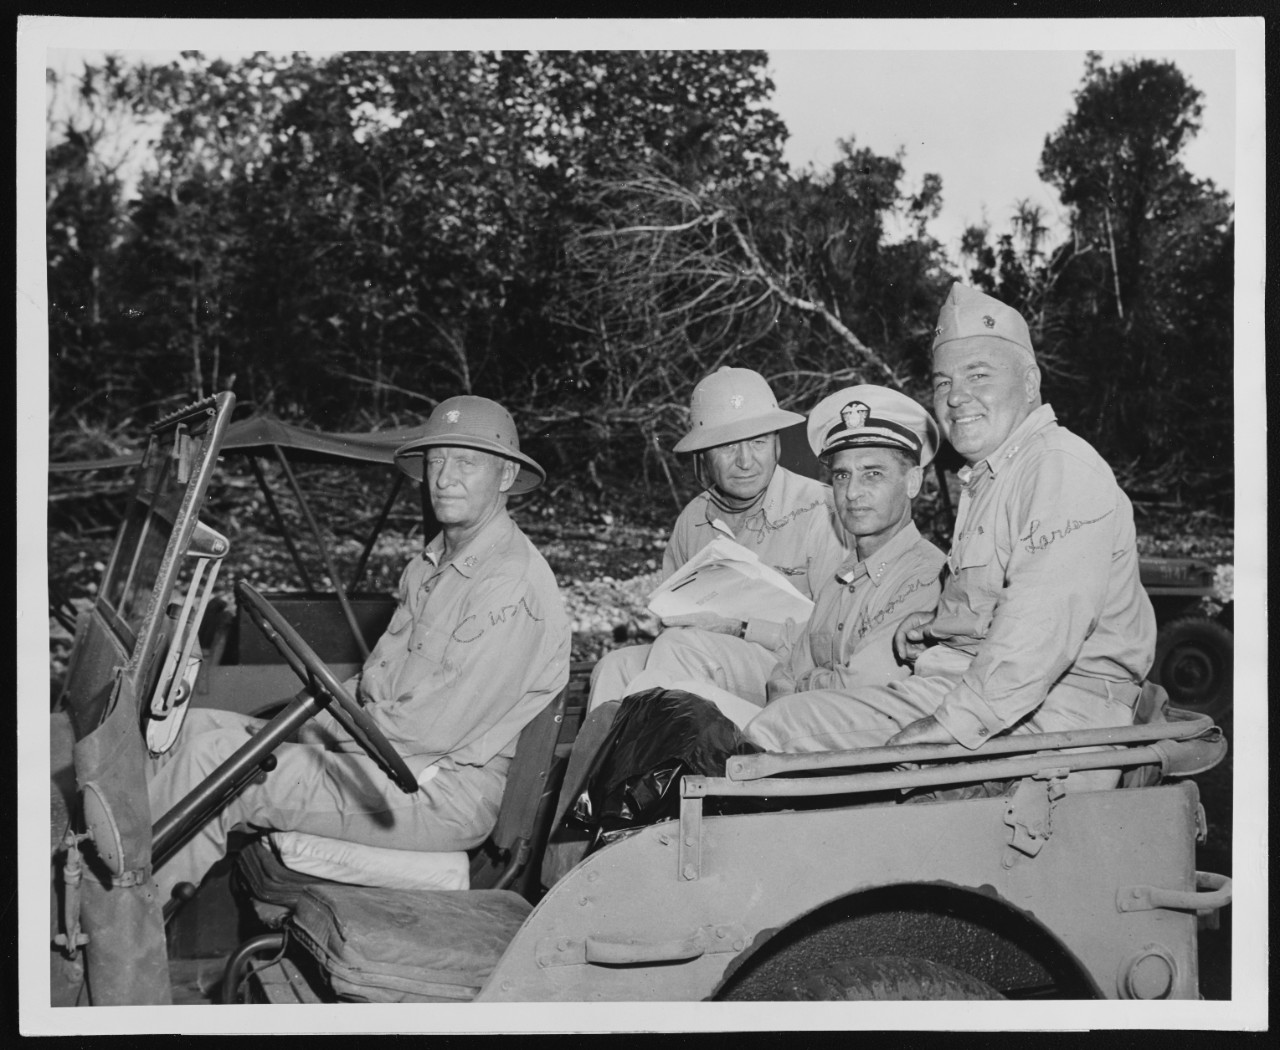 Fleet Admiral Nimitz in a Jeep on Guam with some of his Staff Officers